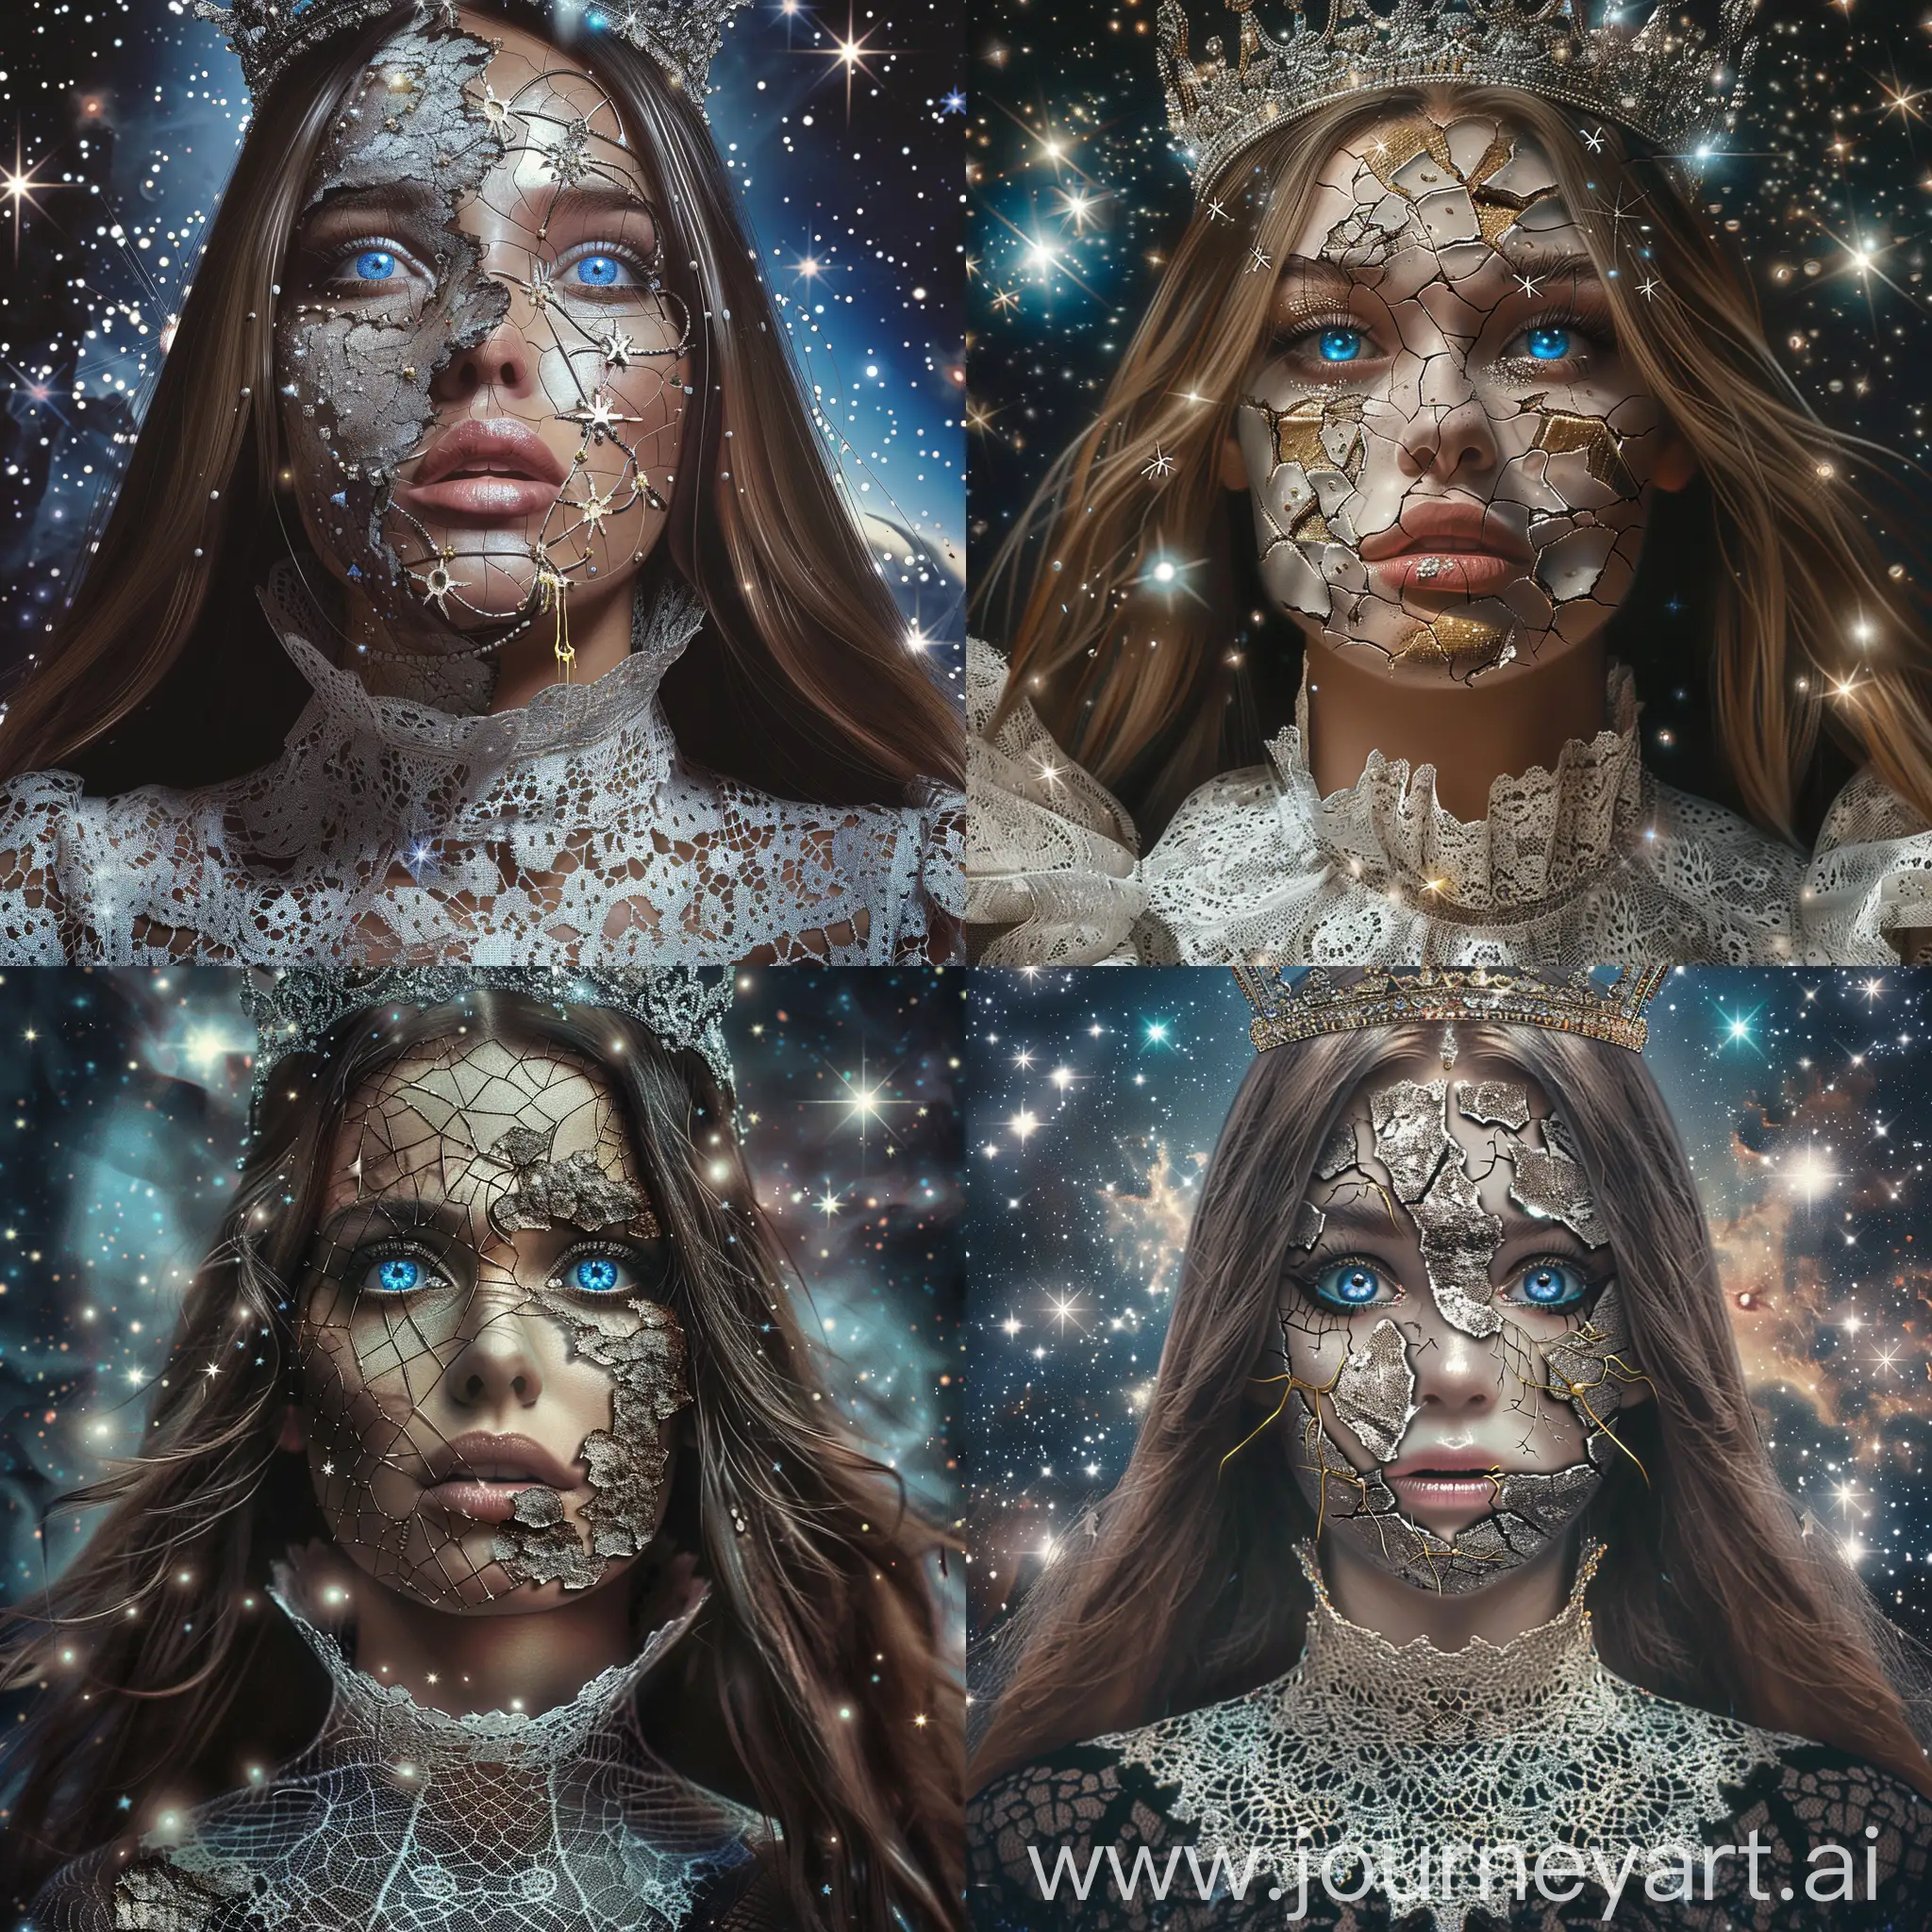 a wonderful breathtaking surreal image of a beautiful woman with, long hair , wearing  a crown  sad blue eyes. High lace collar and a cracked beautiful face with silver repairings with shiny golden dendritic glue among the cracks of the face, ultradetailed image. Background  with  bright  stars